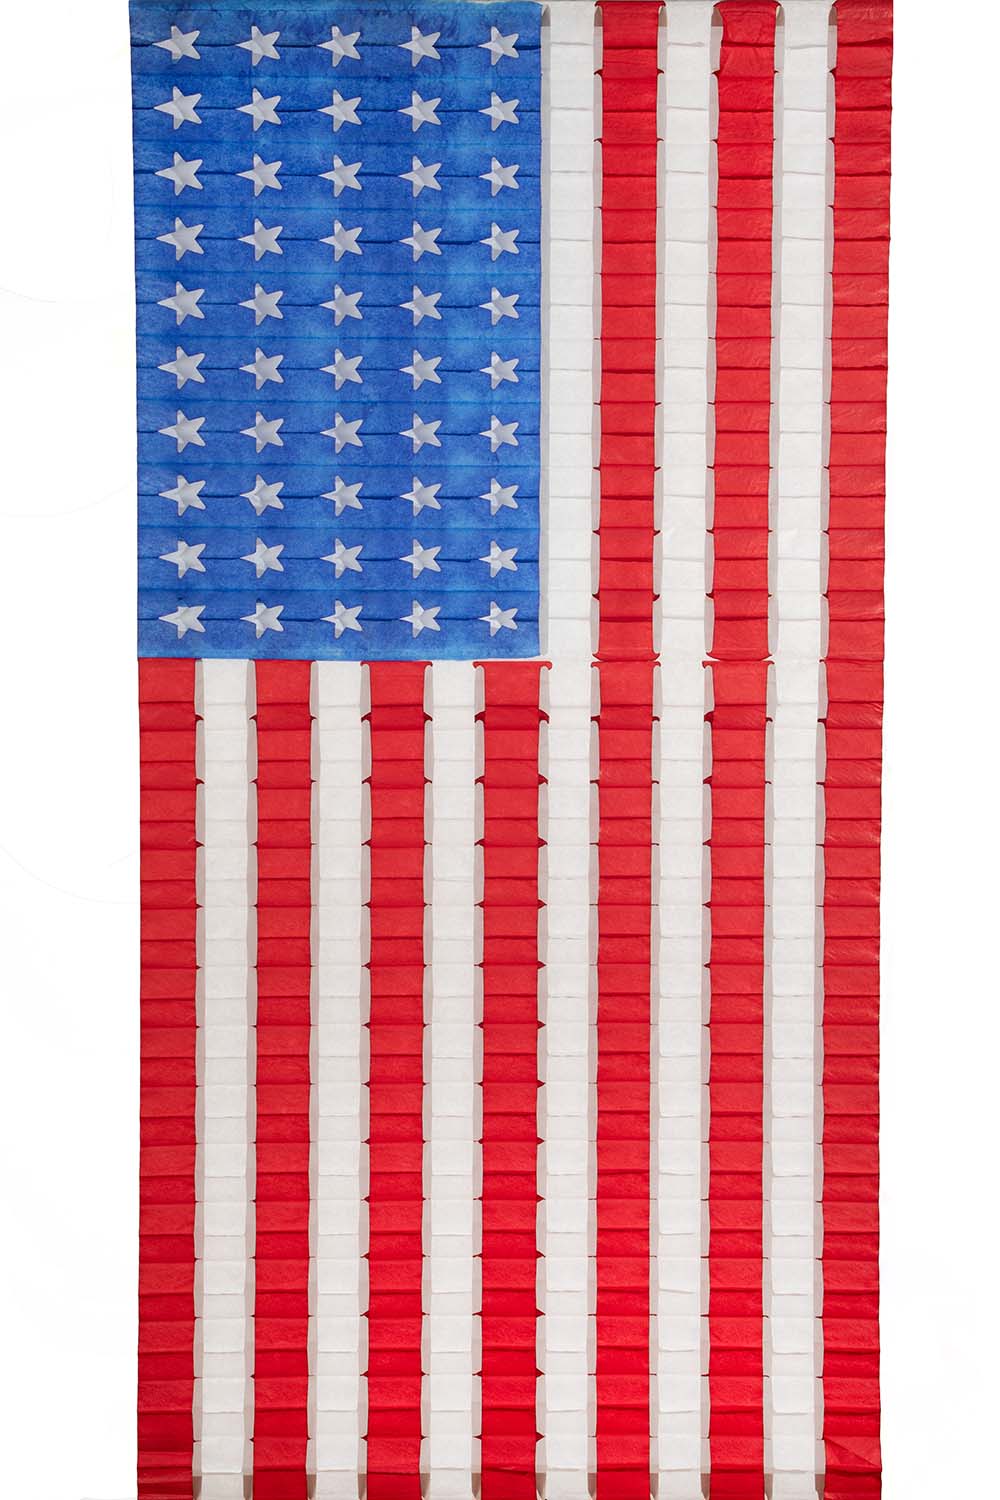 An Hester &amp; Cook Patriotic Flag decoration made out of plastic bottles.